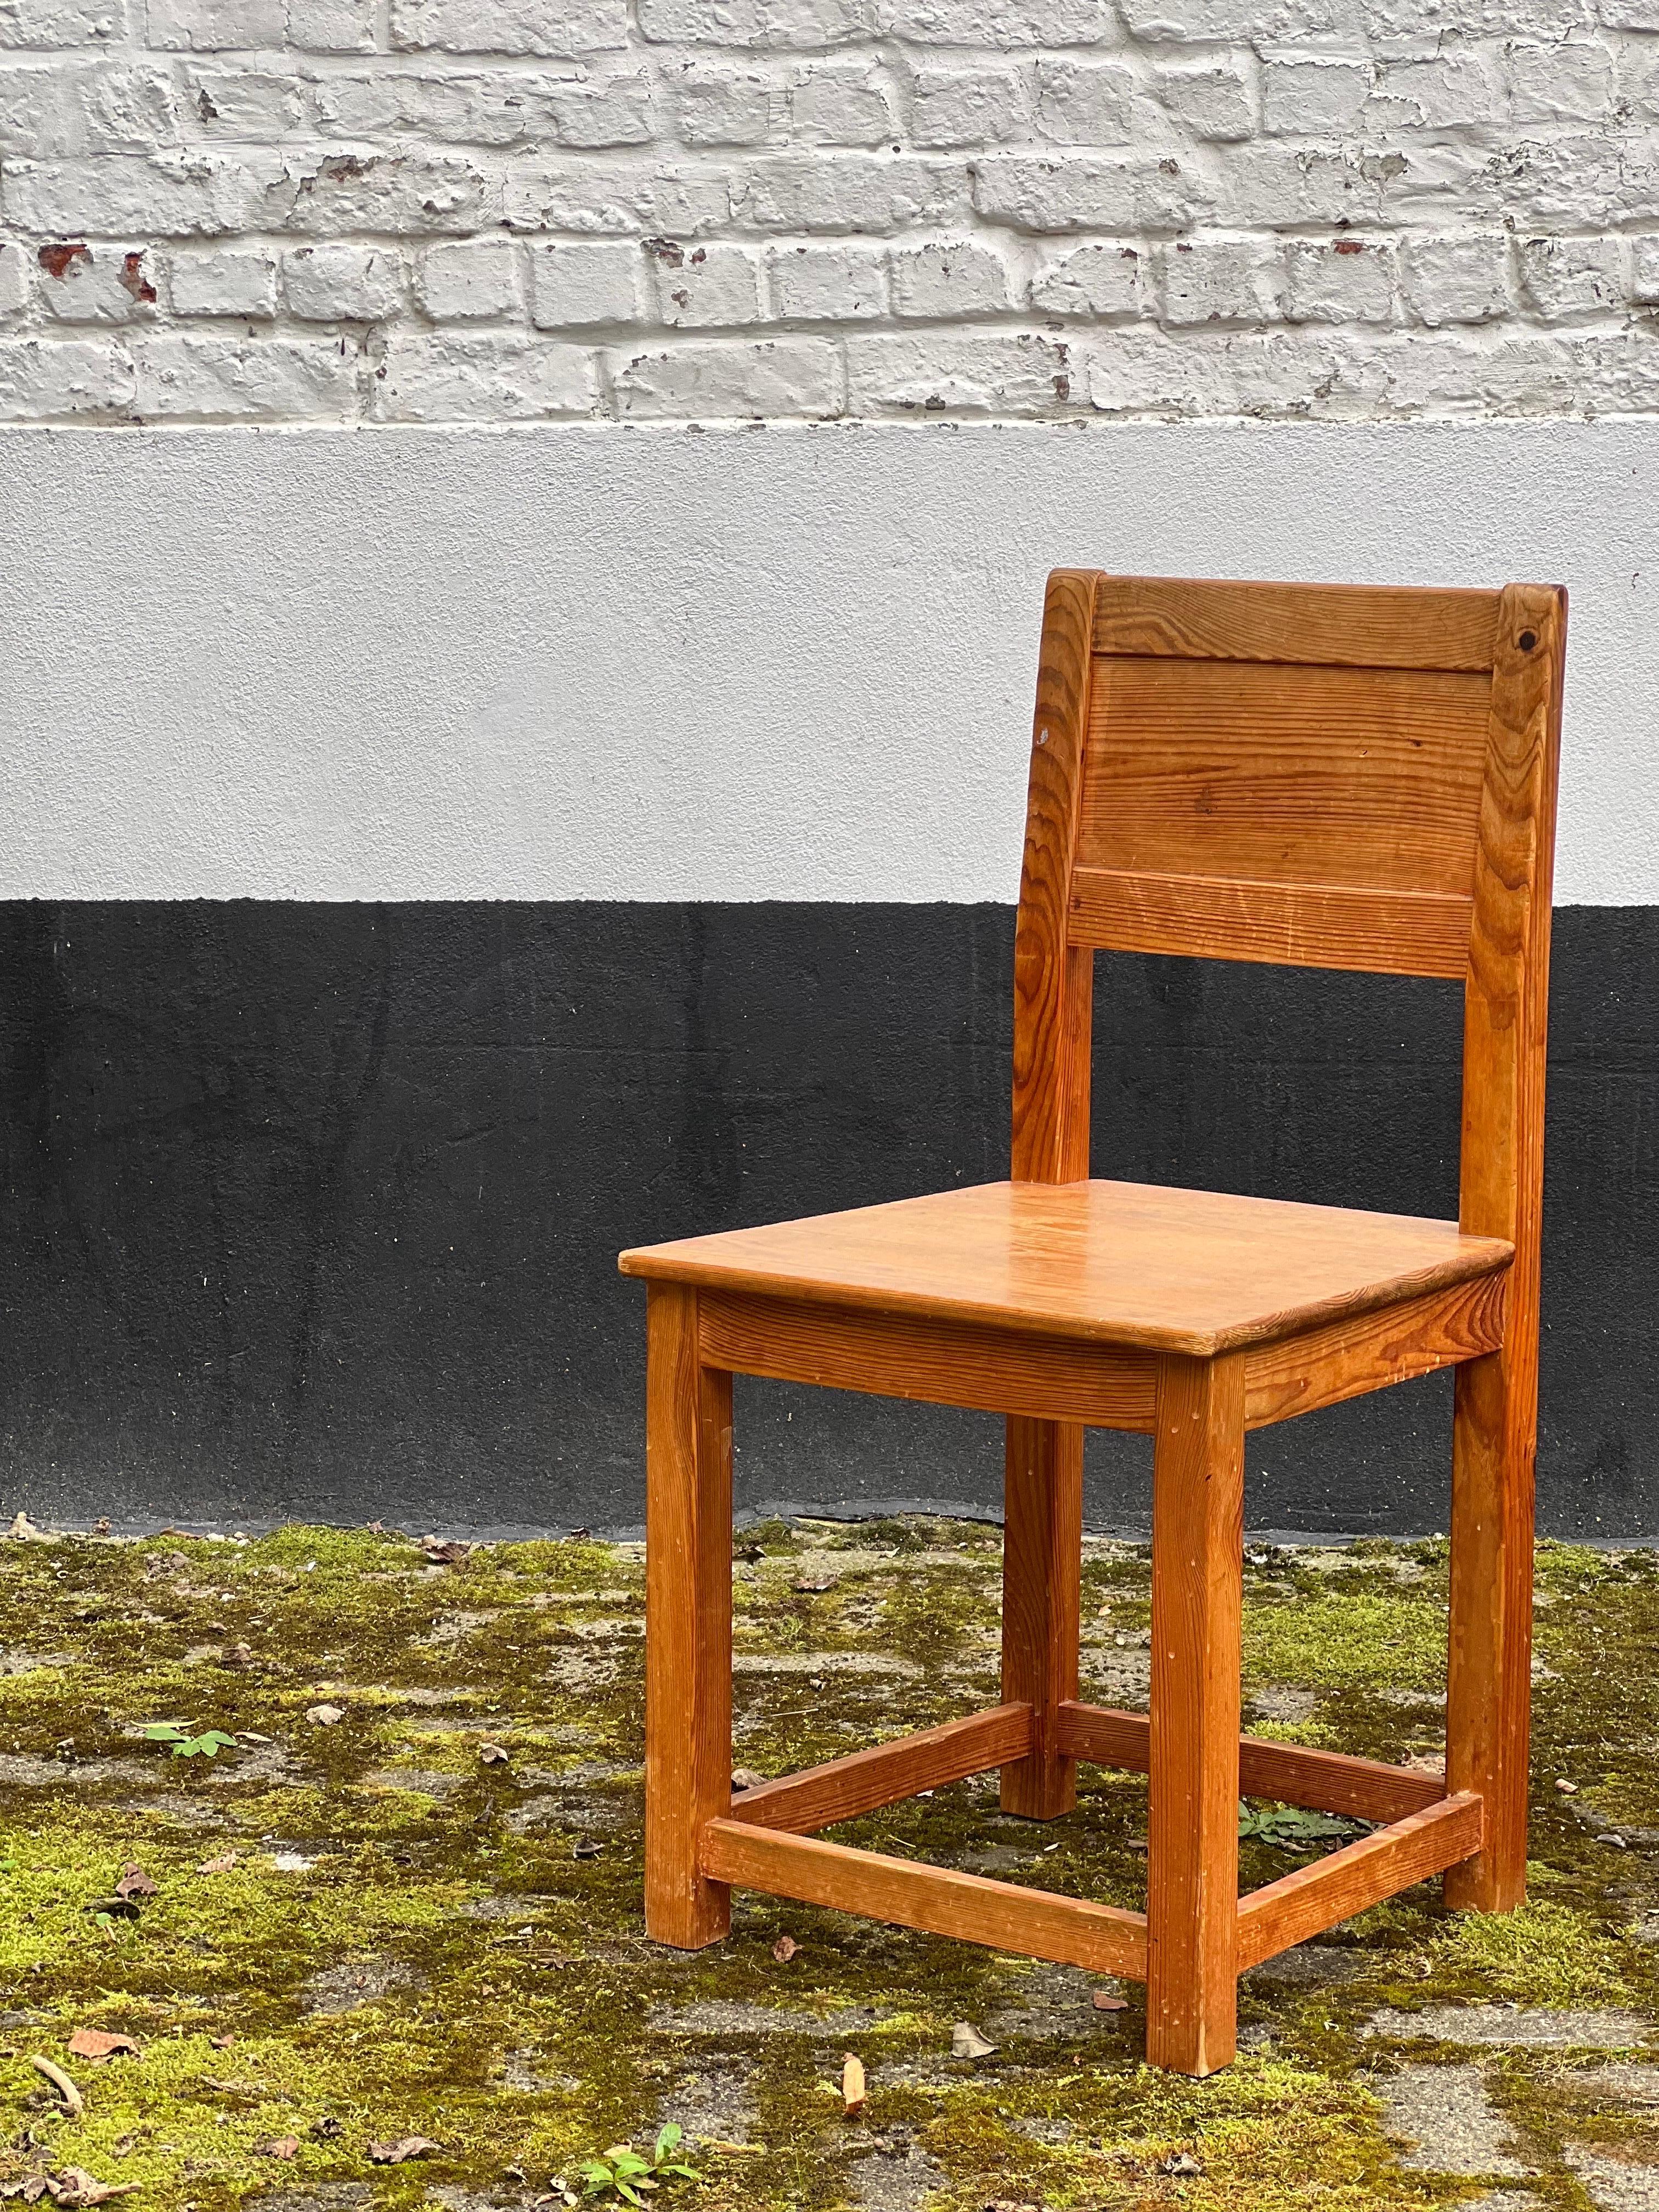 Set of 4 classic, minimal and elegant lightweight comfortable pinewood chairs from Sweden around 1900. These are massive pine that shows a nice warm patina. We did not touch anything to preserve the almost 100 years of use.